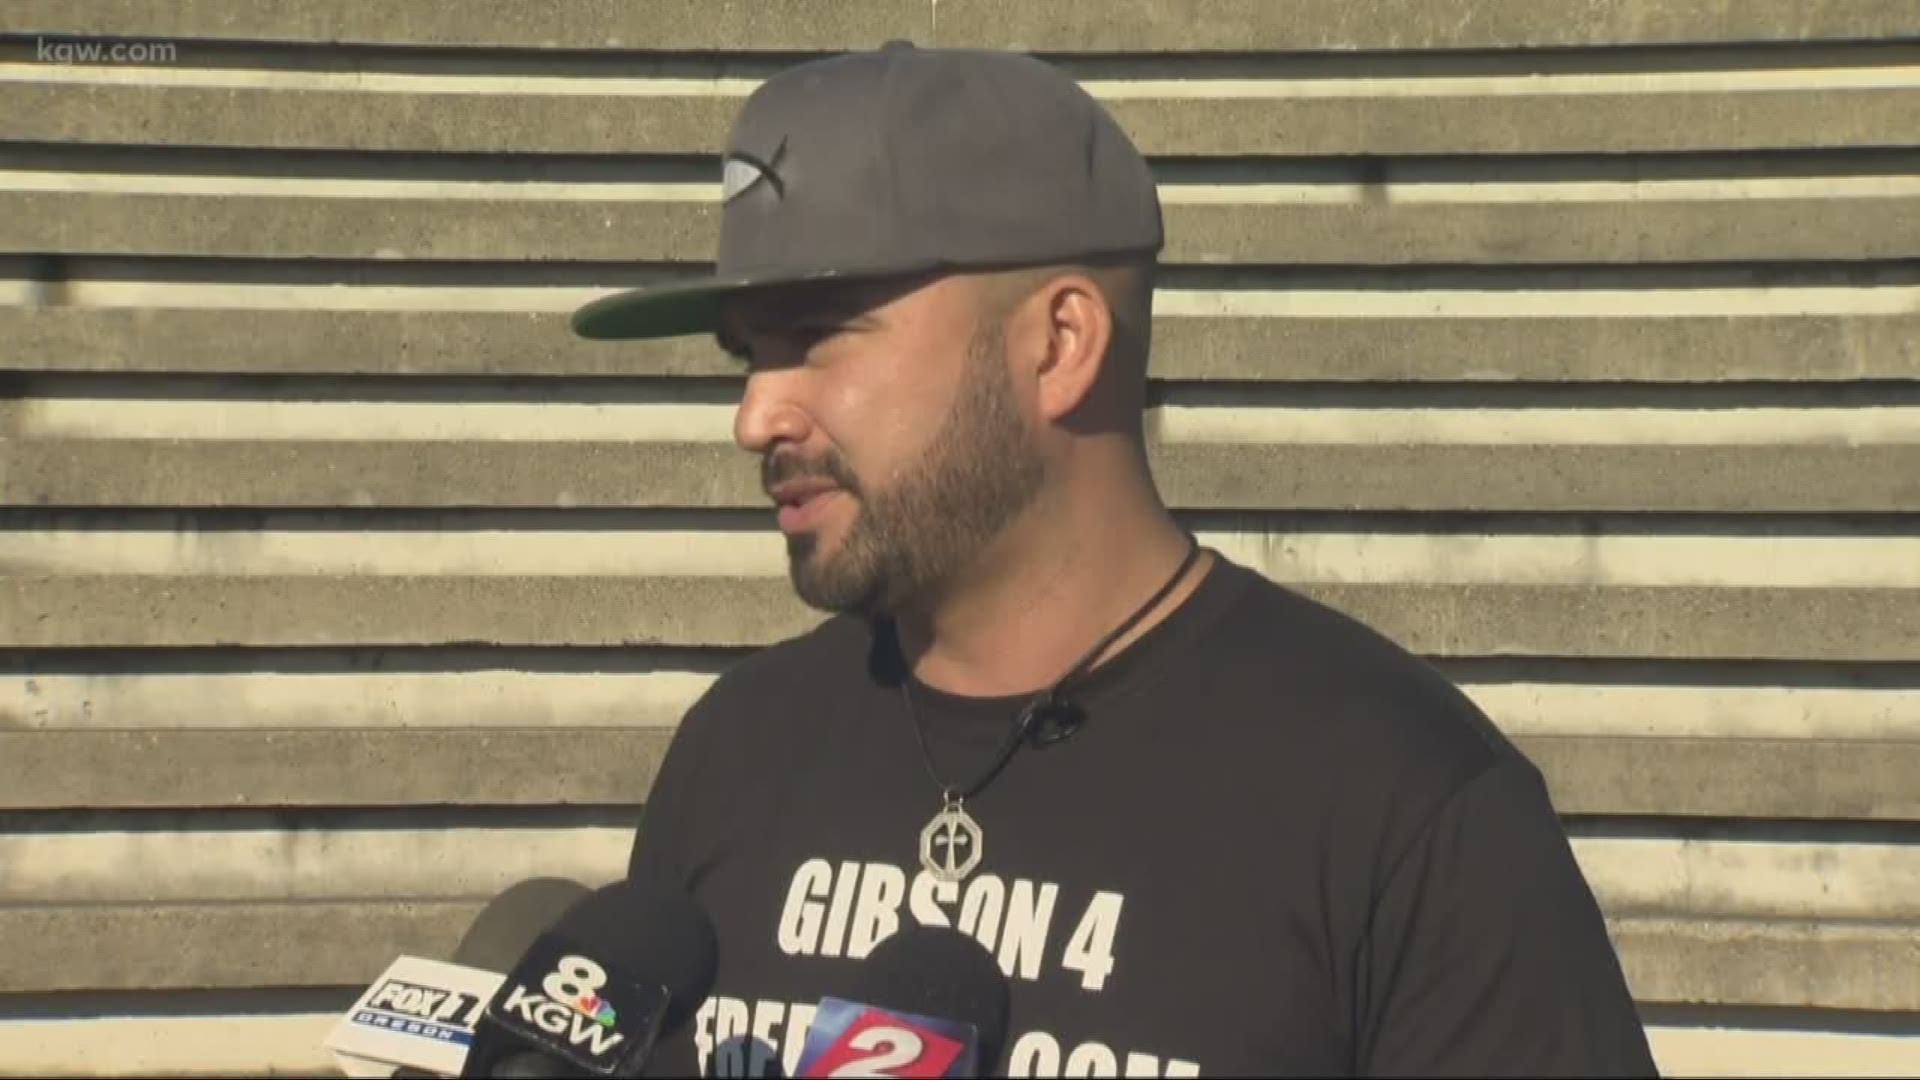 Patriot Prayer leader Joey Gibson faces criminal charges in connection with a brawl outside a Northeast Portland bar on May Day, according to his lawyer.